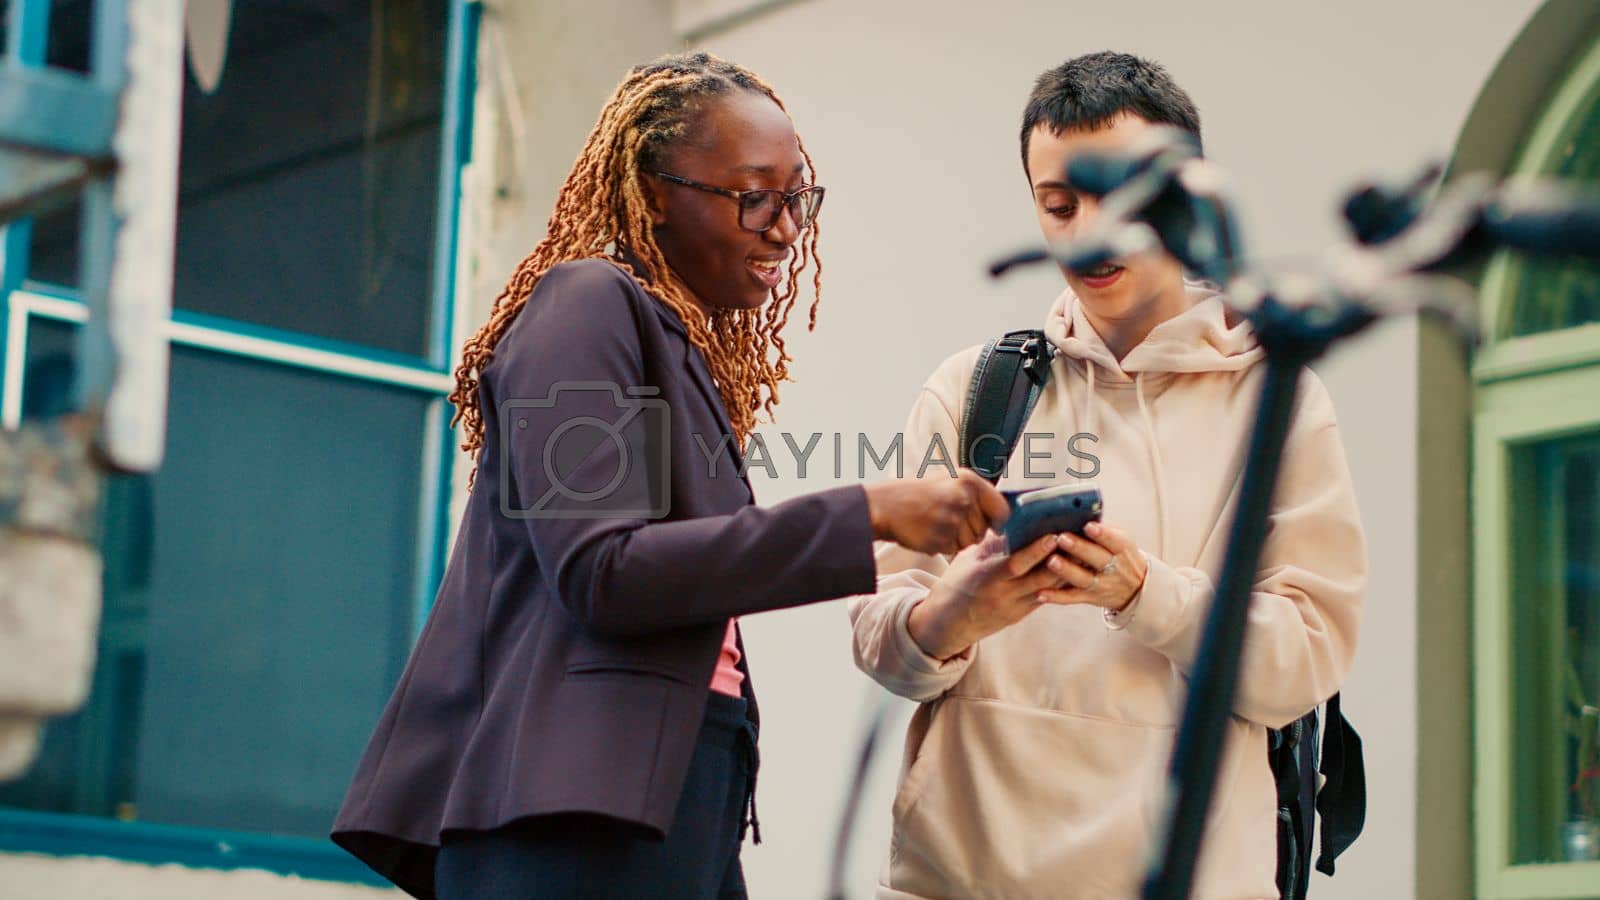 Royalty free image of Female customer using credit card to pay for food order by DCStudio